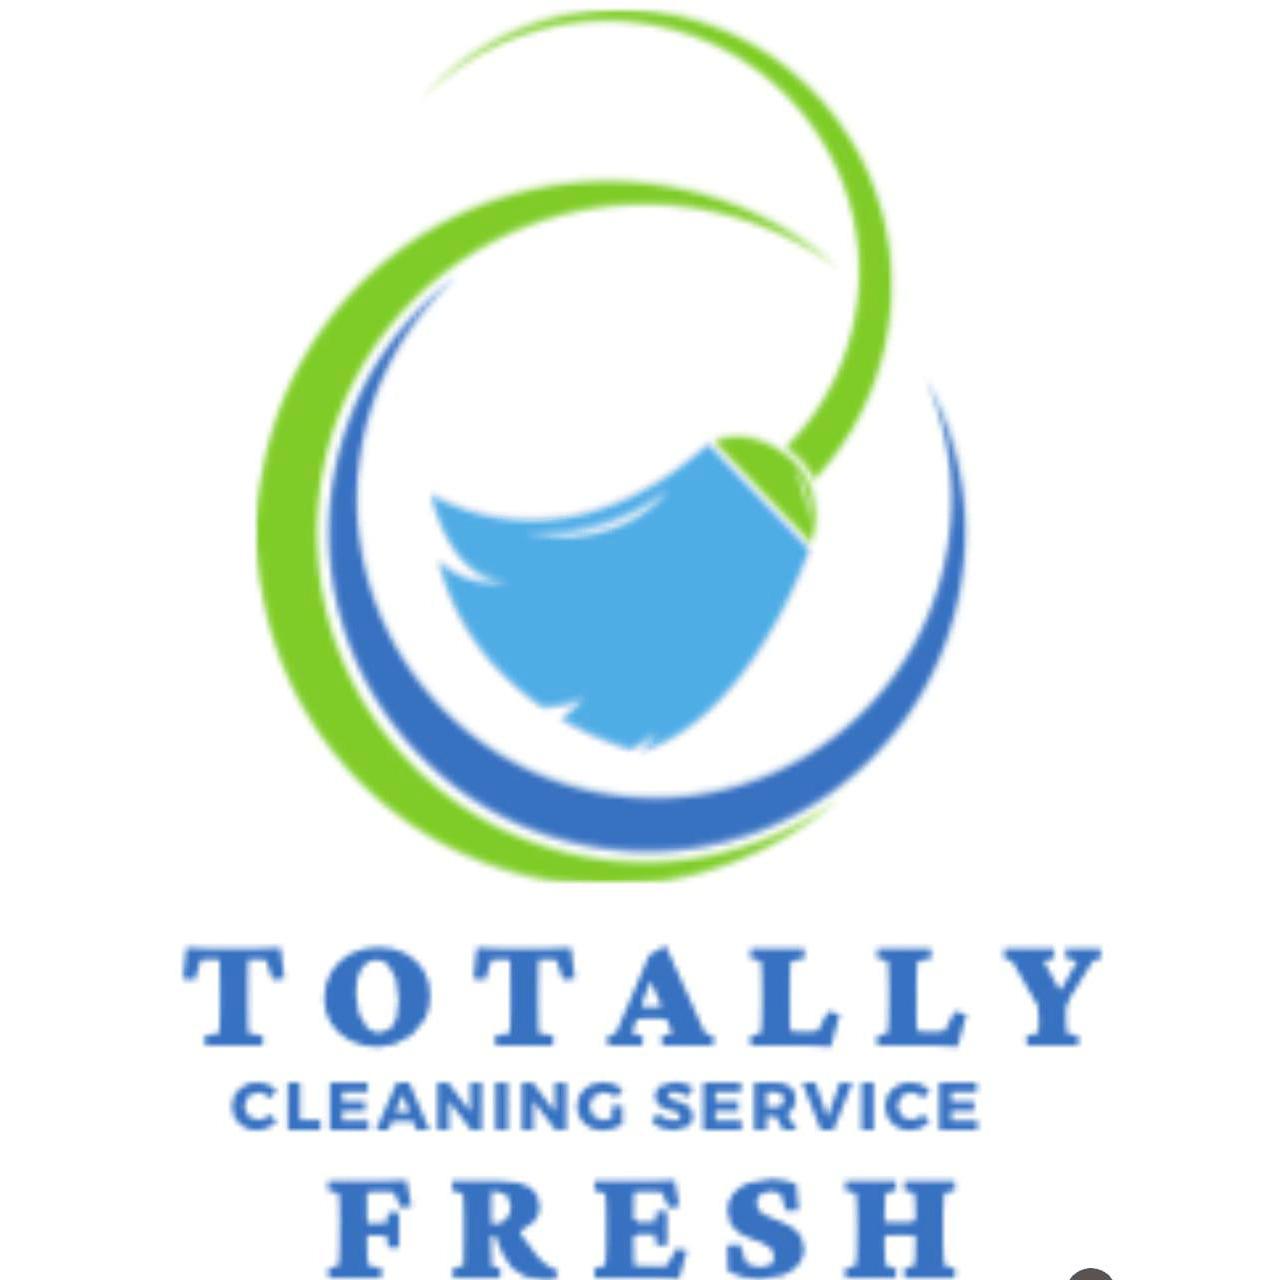 Totally Fresh Clean - Luton, Bedfordshire LU2 7EE - 07859 856202 | ShowMeLocal.com